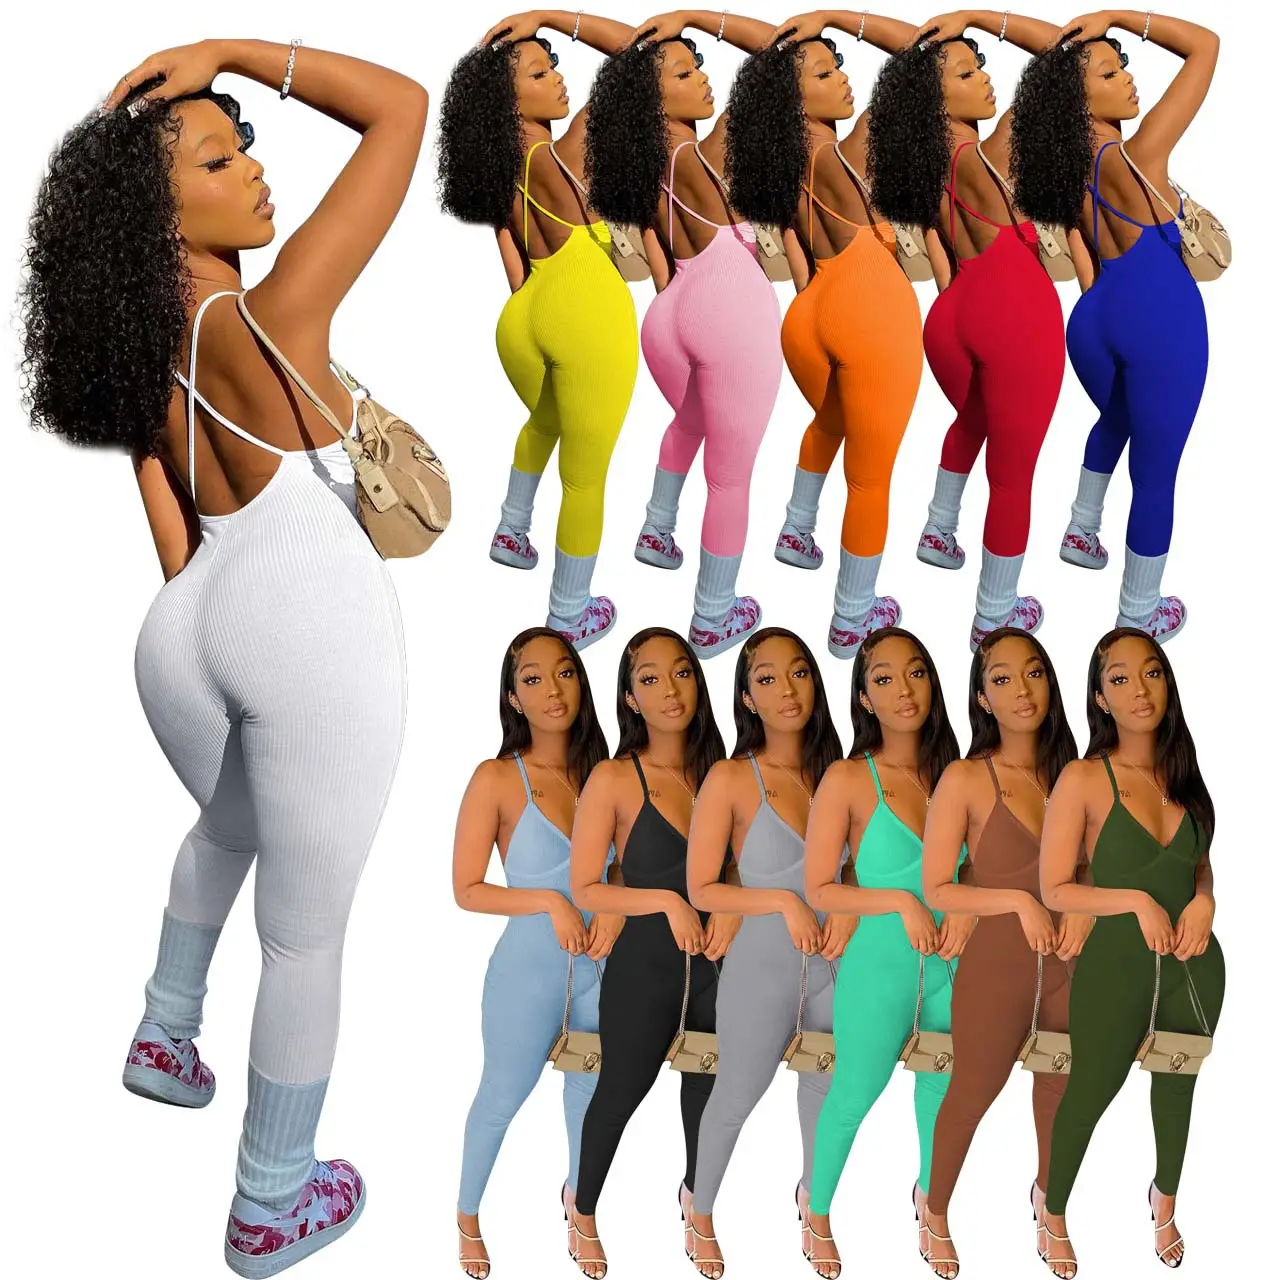 women's clothing ladies Jogging sport swear ribbed slip sexy bodysuits backless tight body pants one piece women jumpsuits